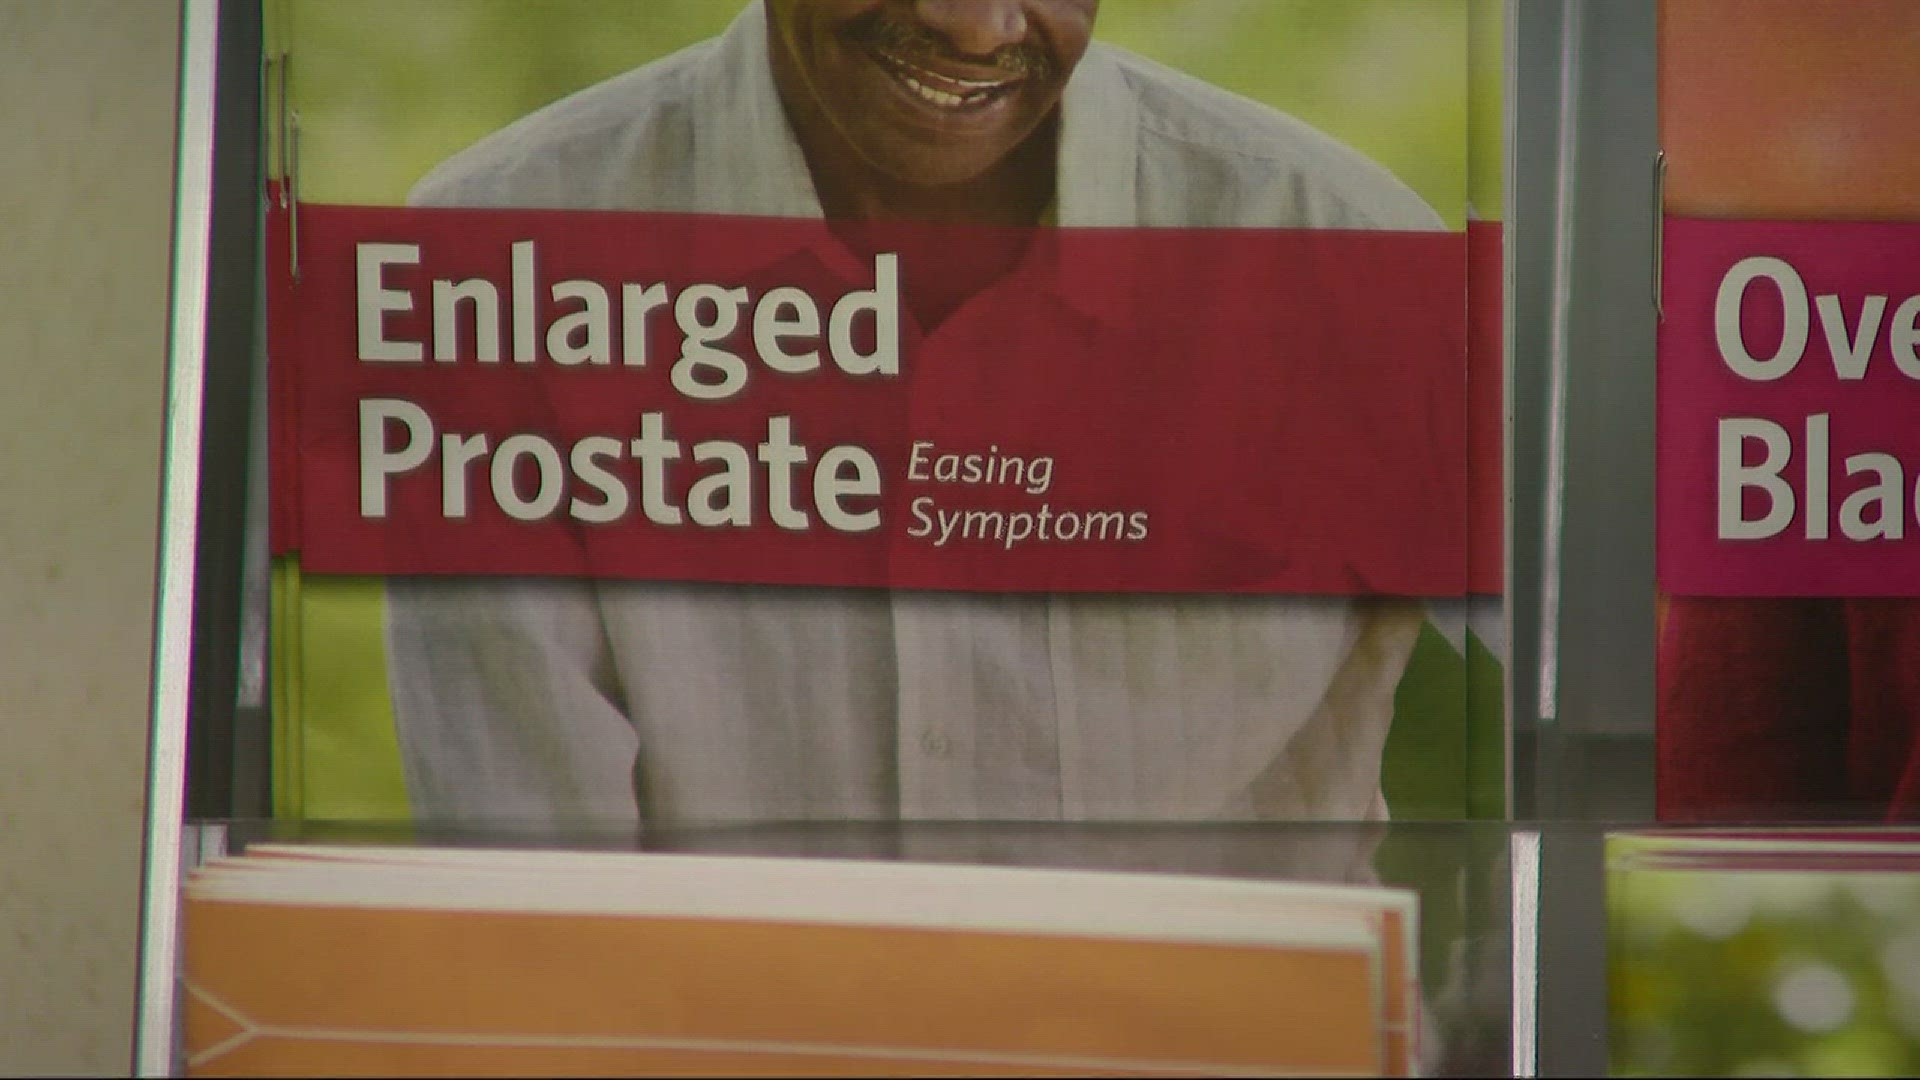 A new procedure is helping patients with enlarged prostate